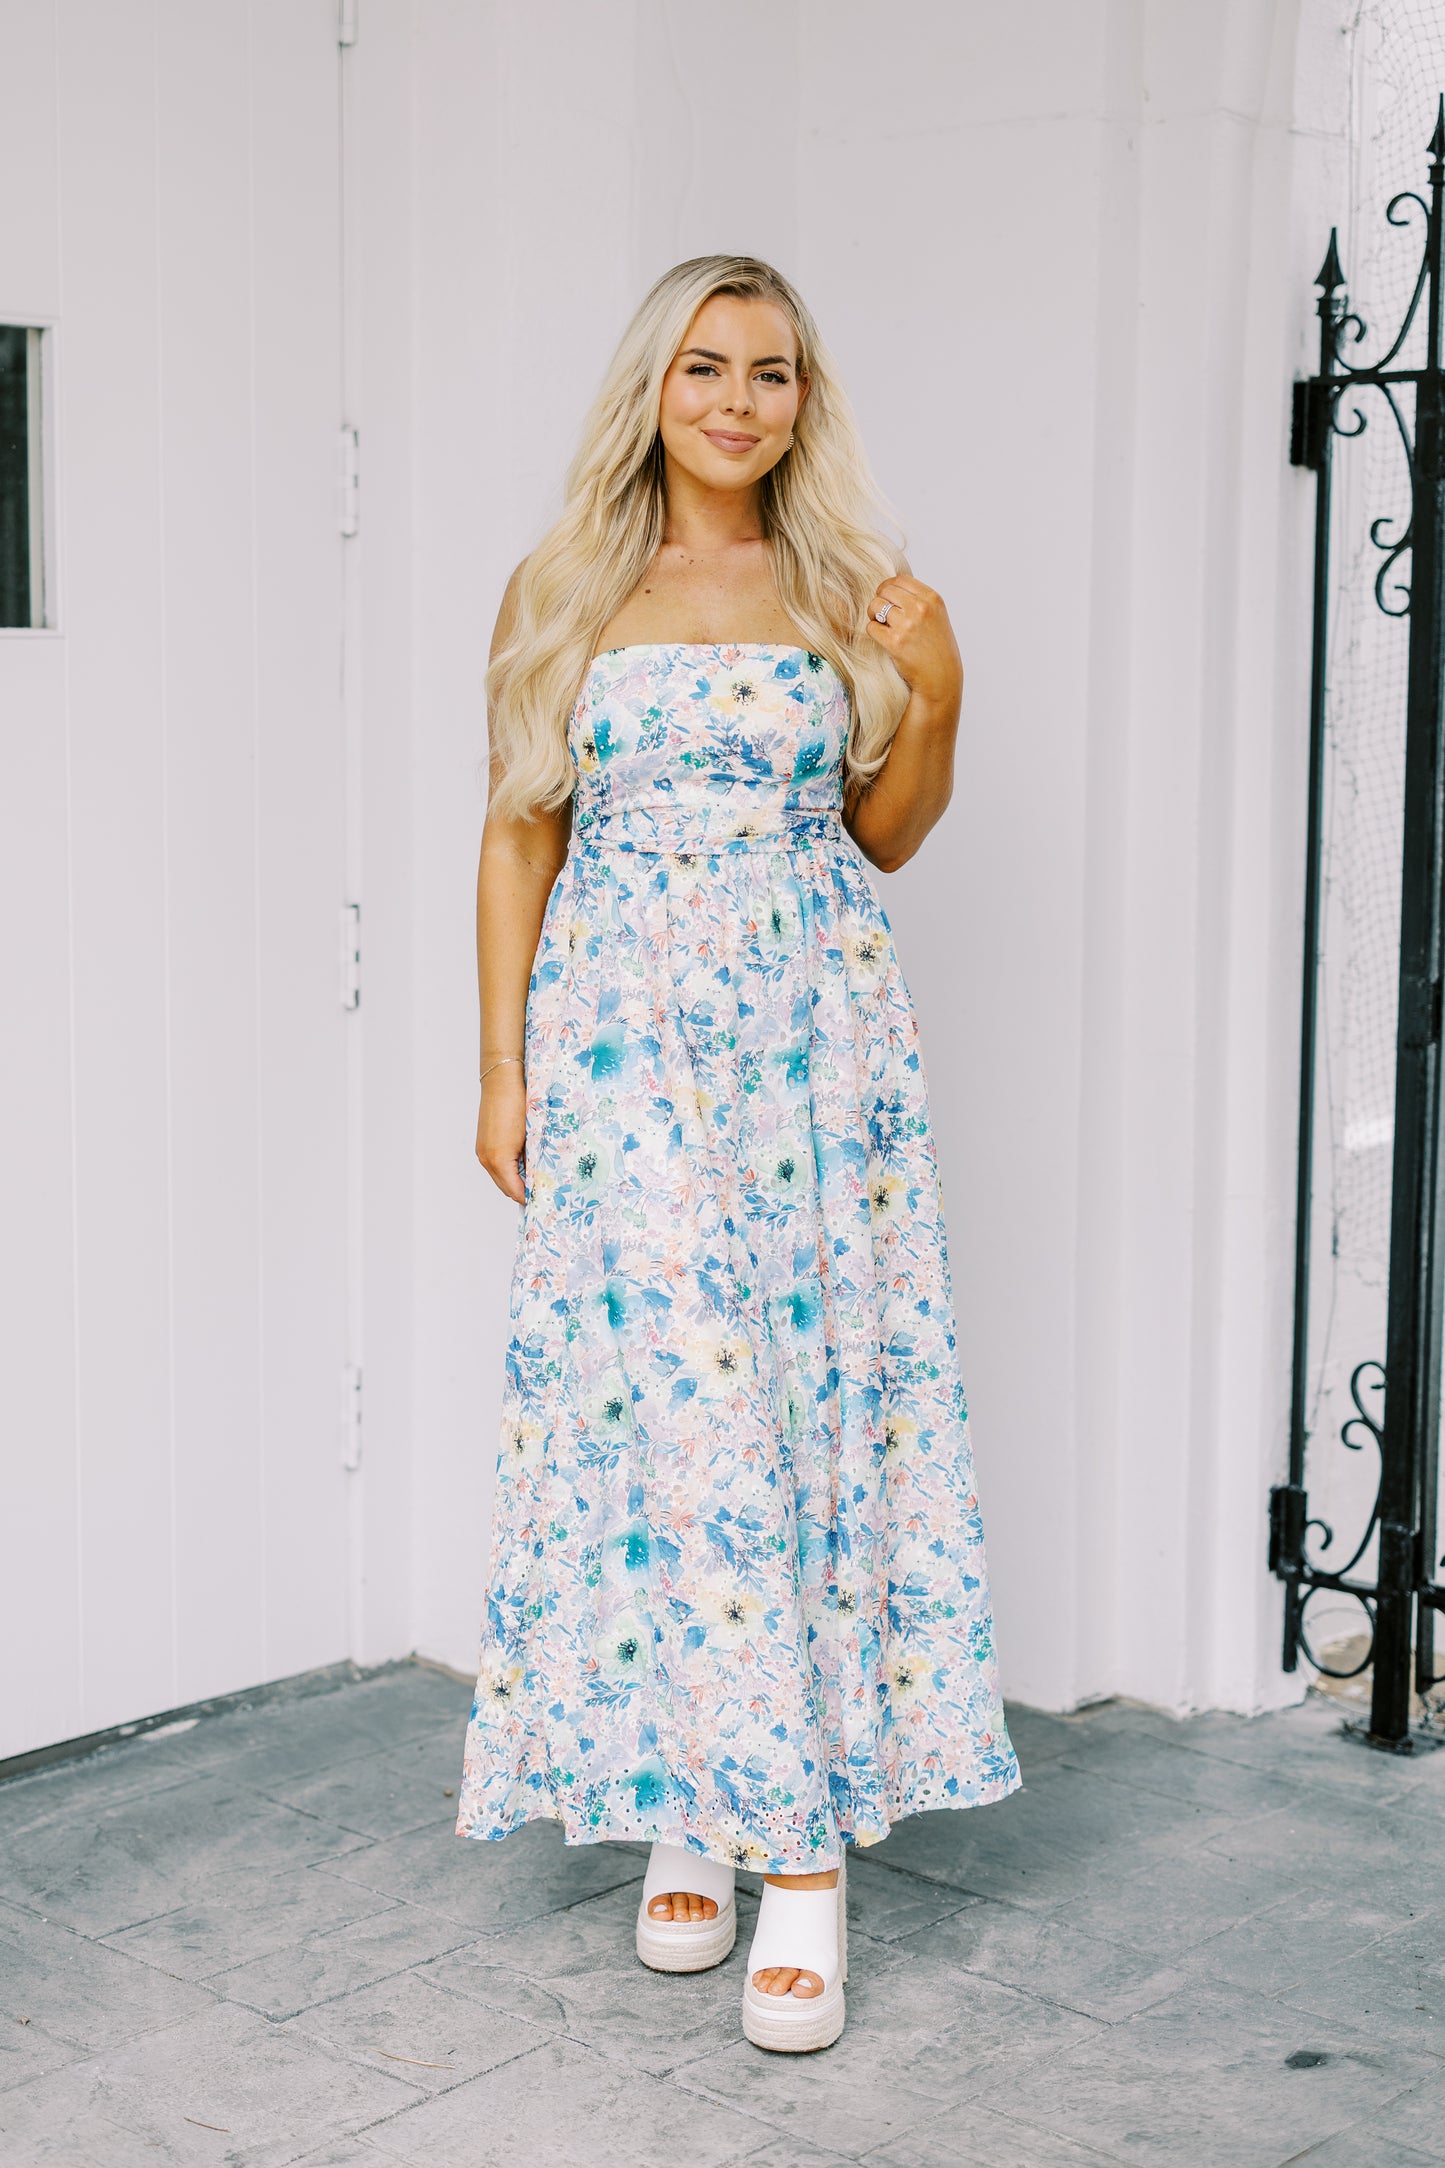 The Kauai Strapless Dress in Floral